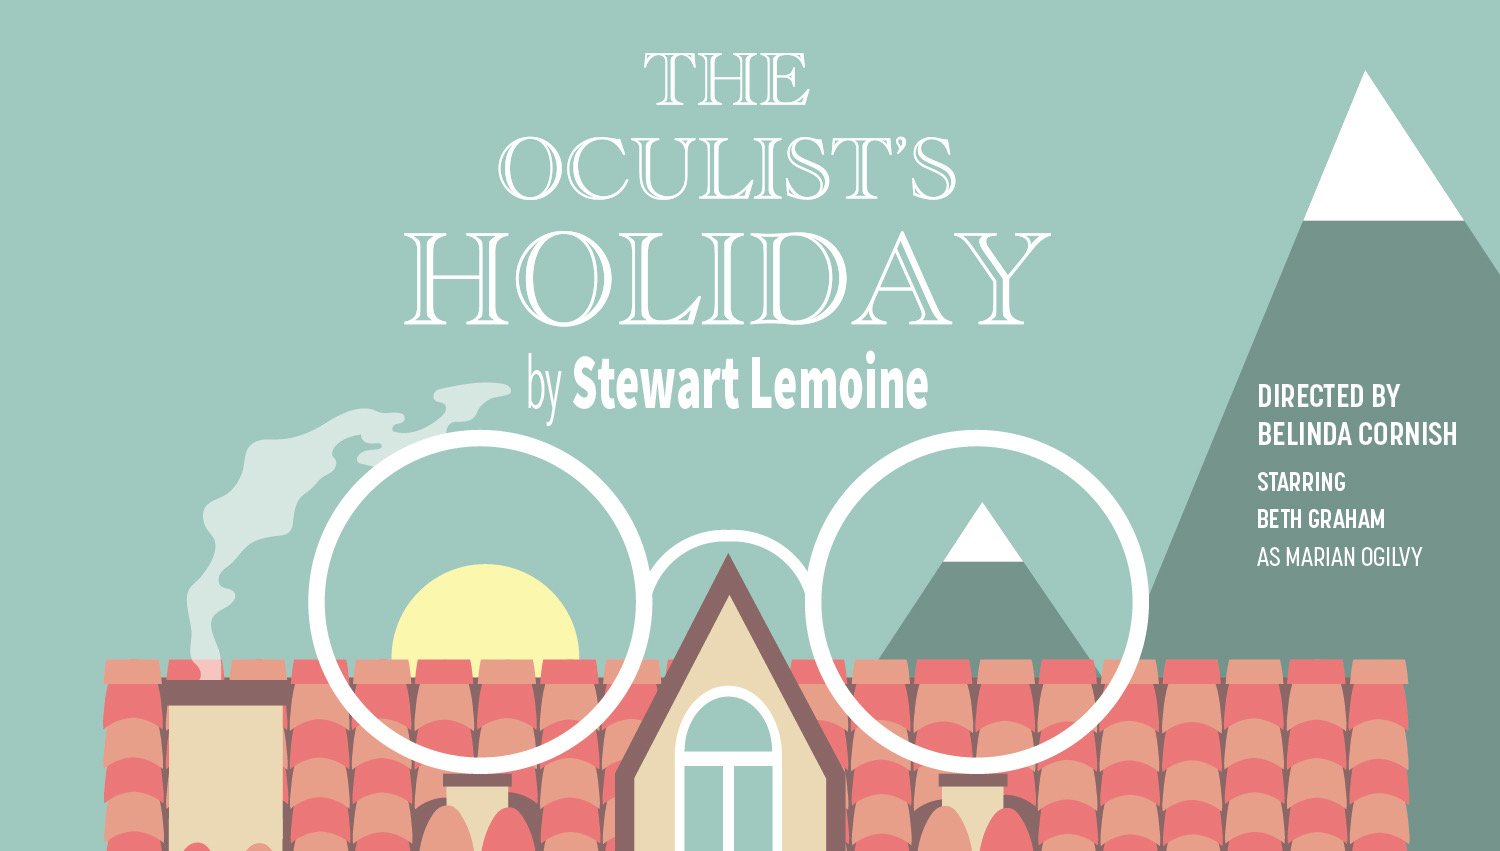 The Oculist’s Holiday